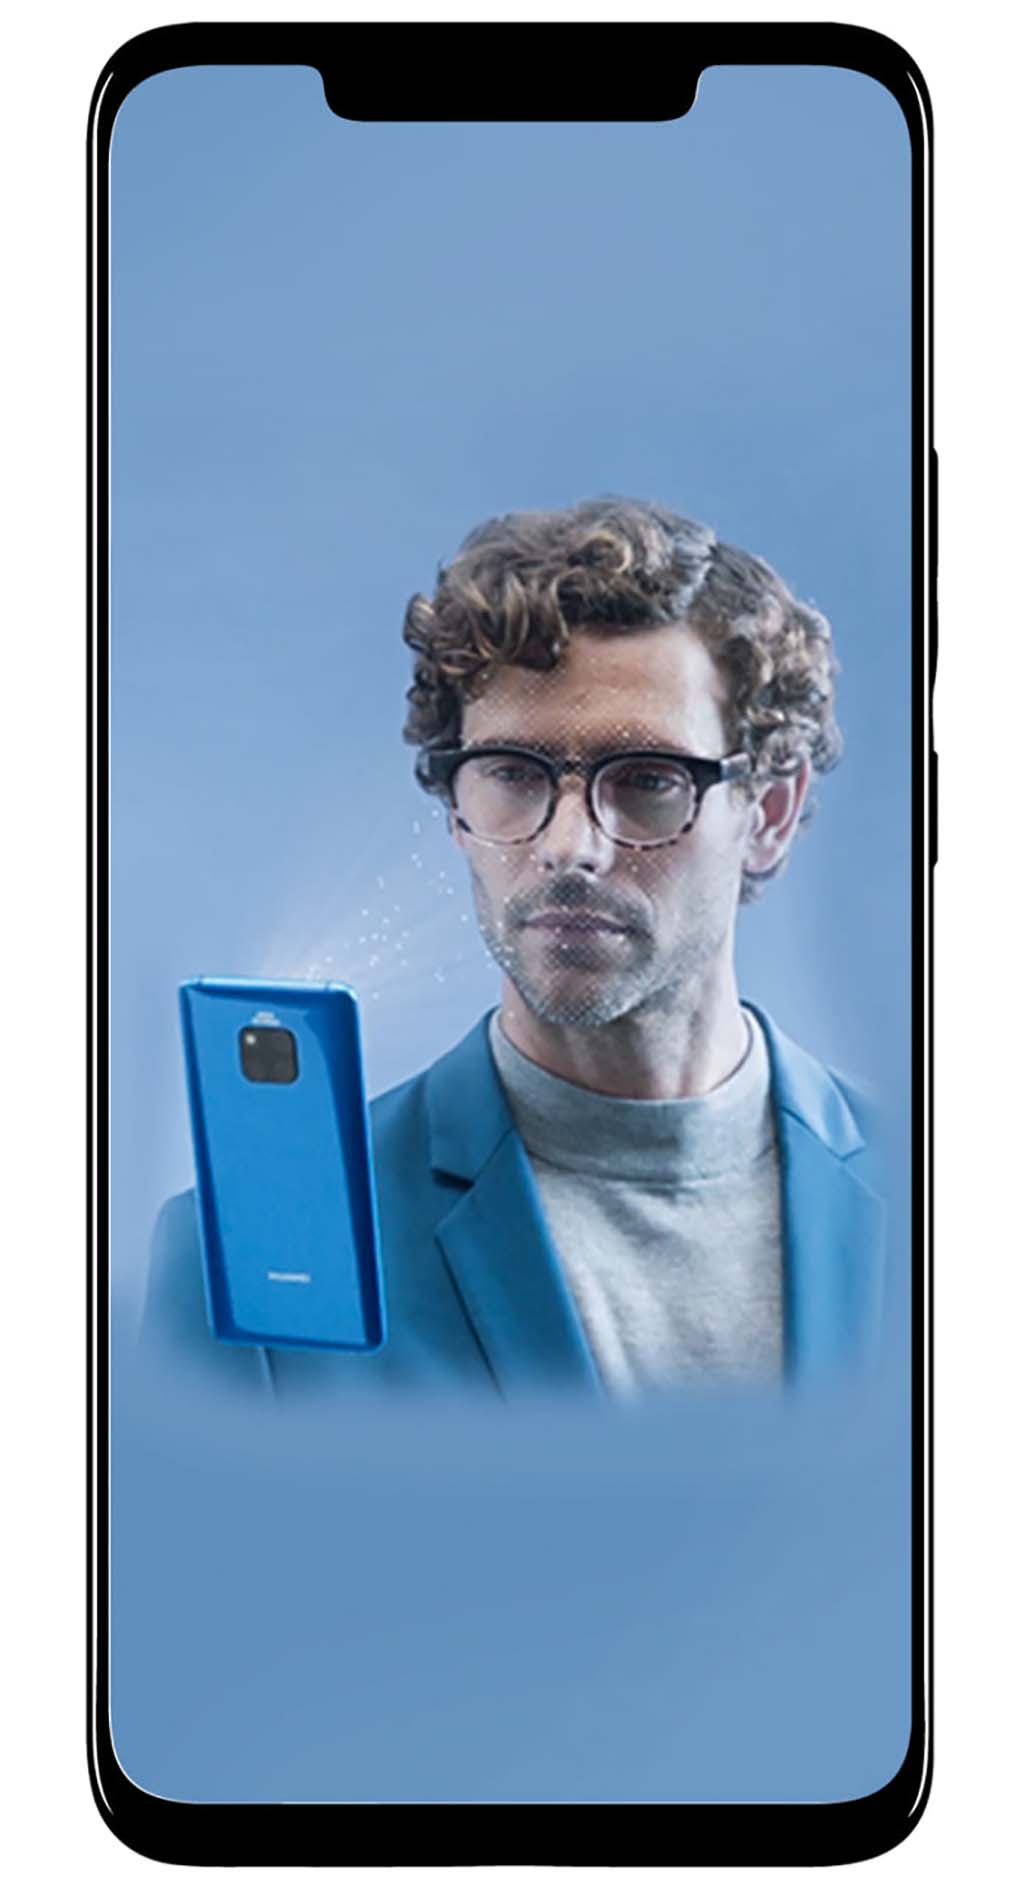 Huawei under-display 3D face recognition